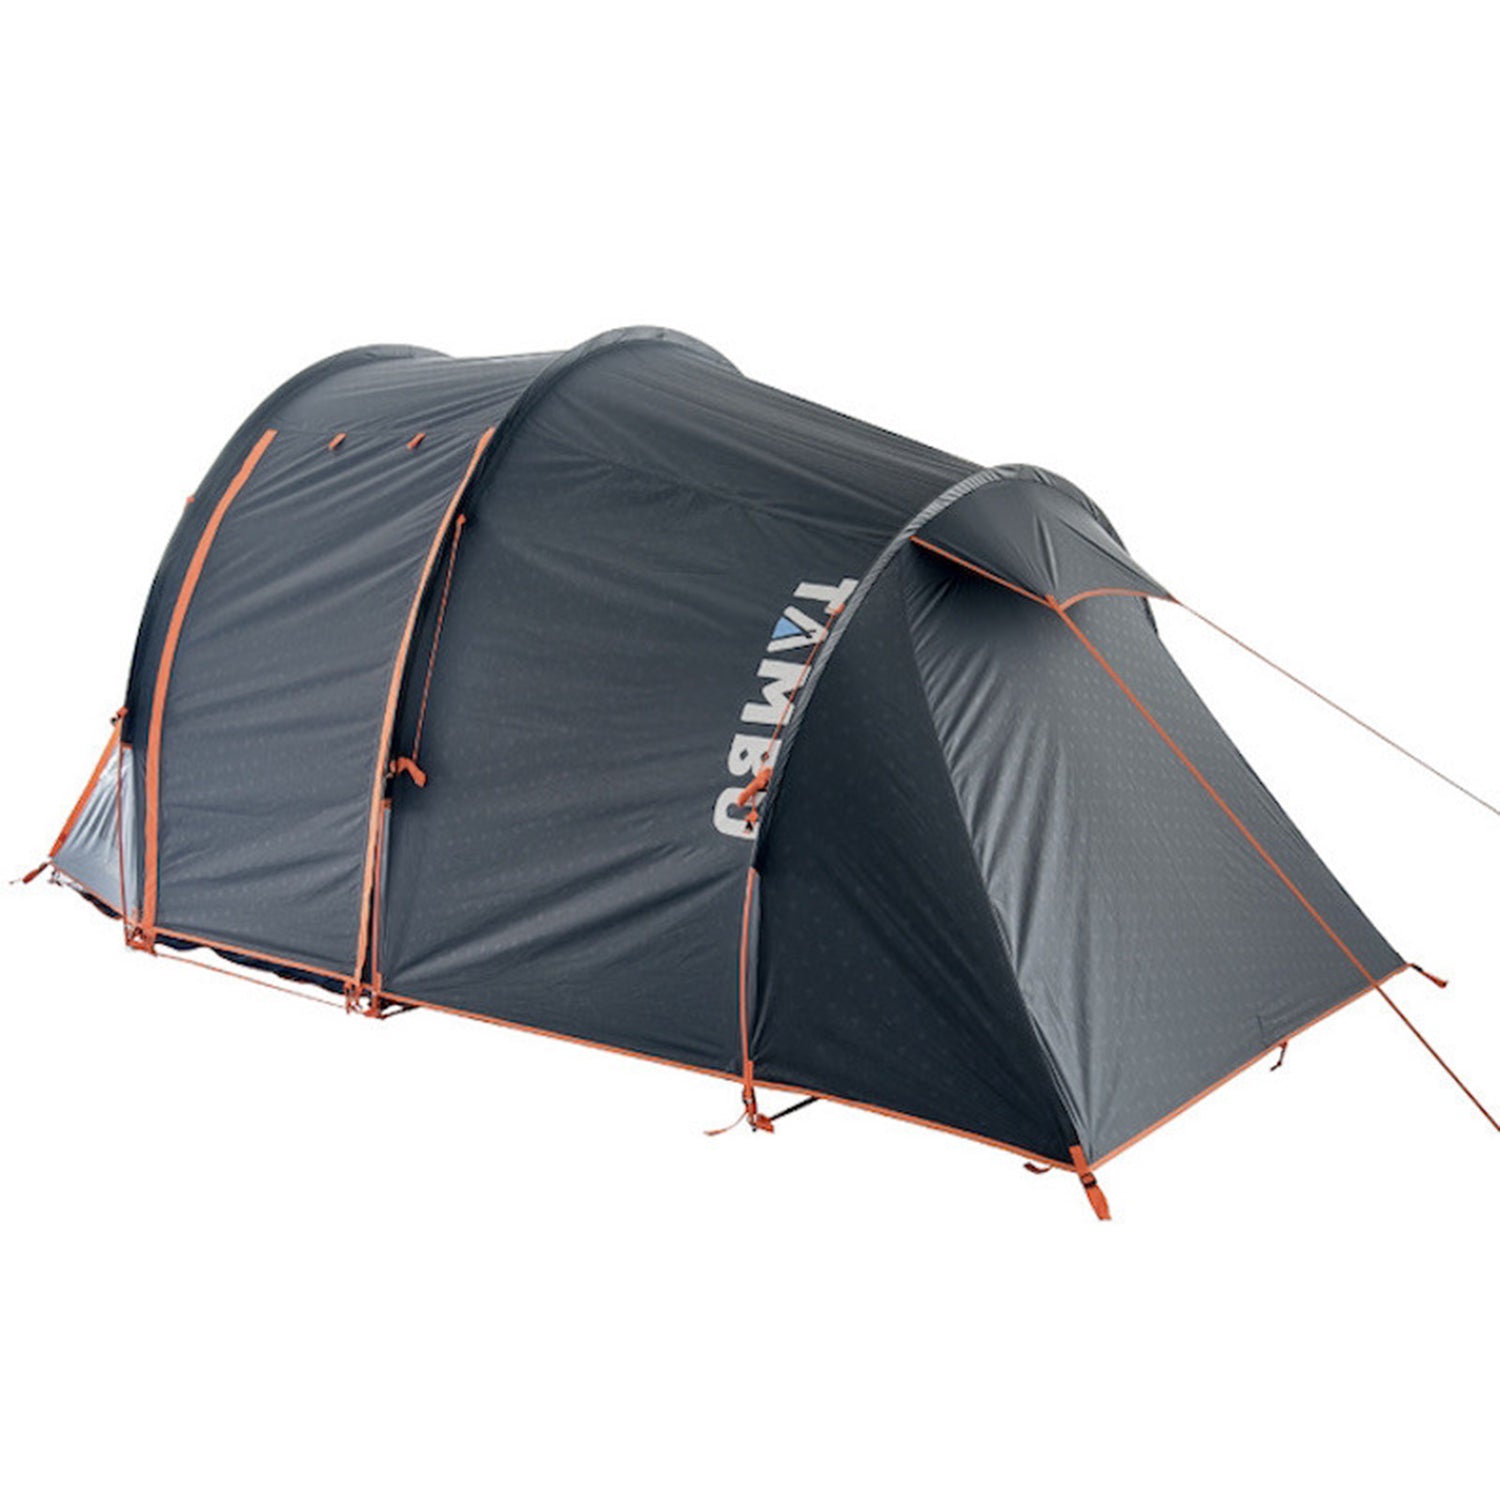 ABAKASA 4 | 4 person family tunnel tent